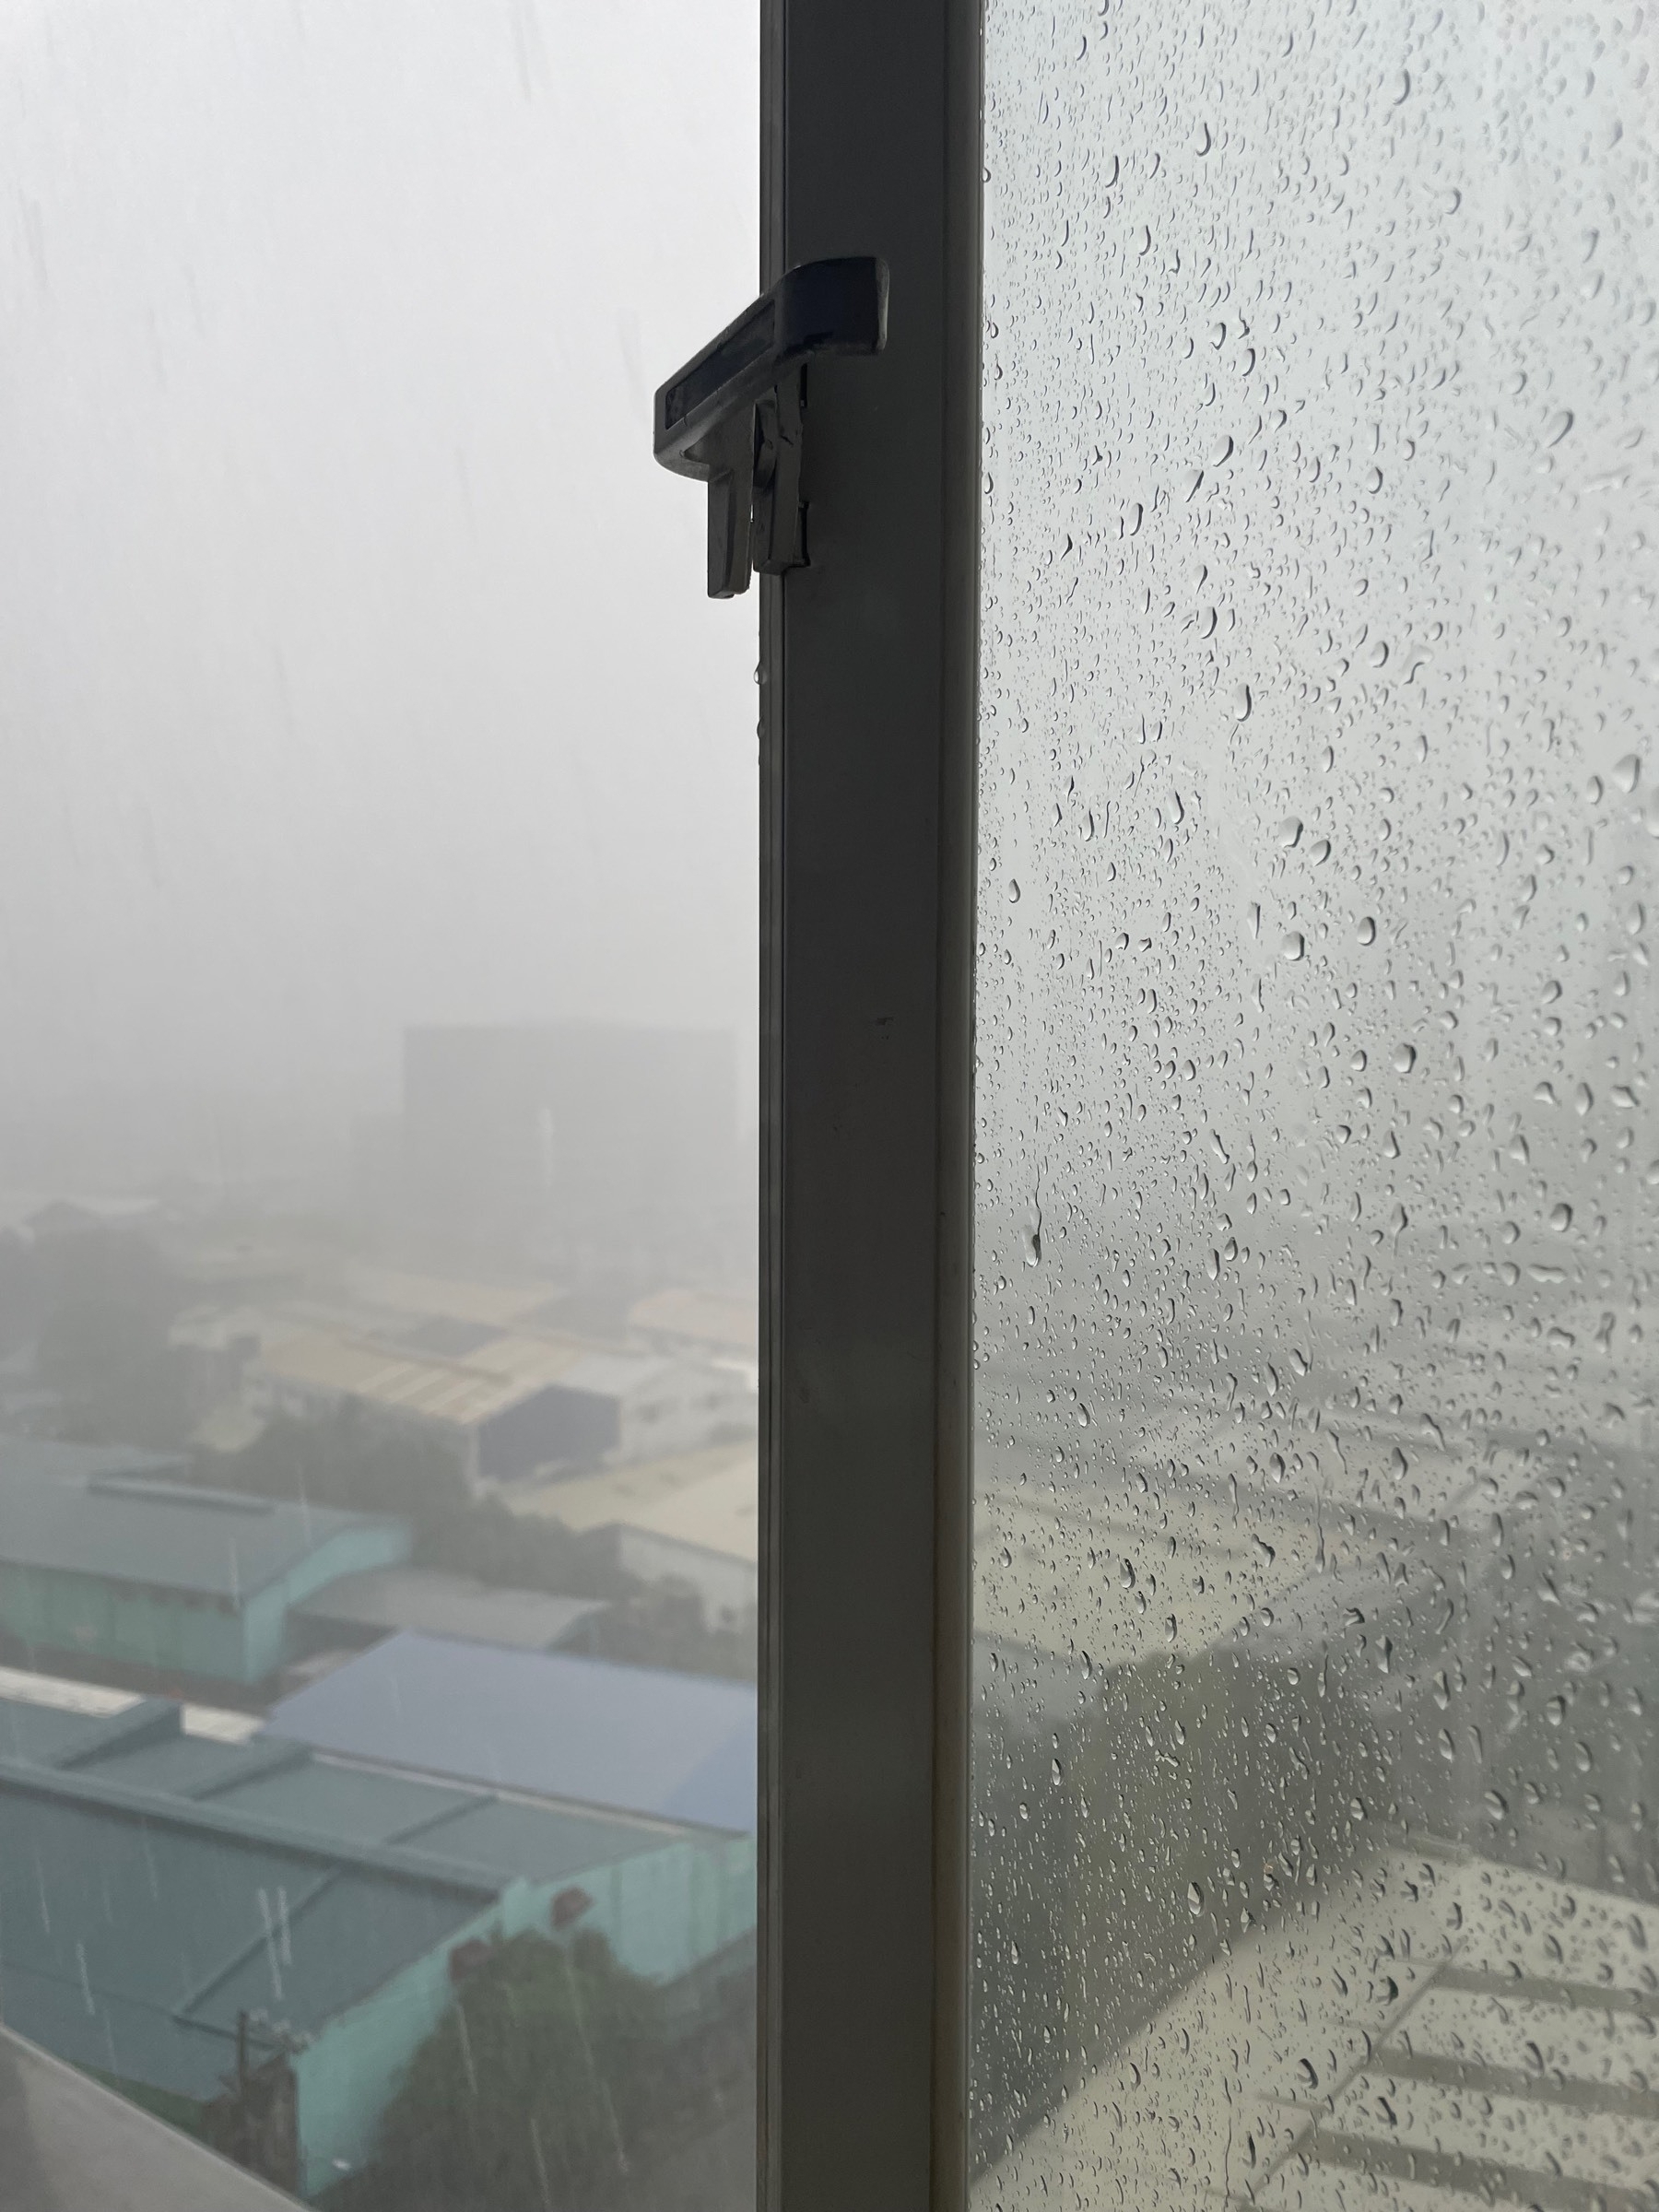 View outside of Chi's window. The rain is pouring, with a foggy outlook the farther you look out. The window pane is aligned to the middle of the picture as a way to frame the outside—seen to the left side portion of the photo—with the right side of the photo, which is the glass of the window pane. There are rain droplets seen on the glass.